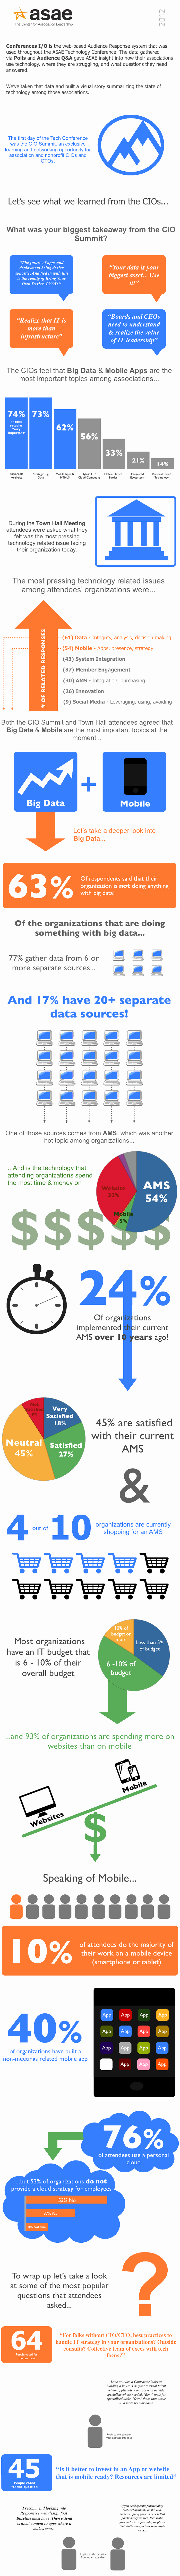 asae-infographic